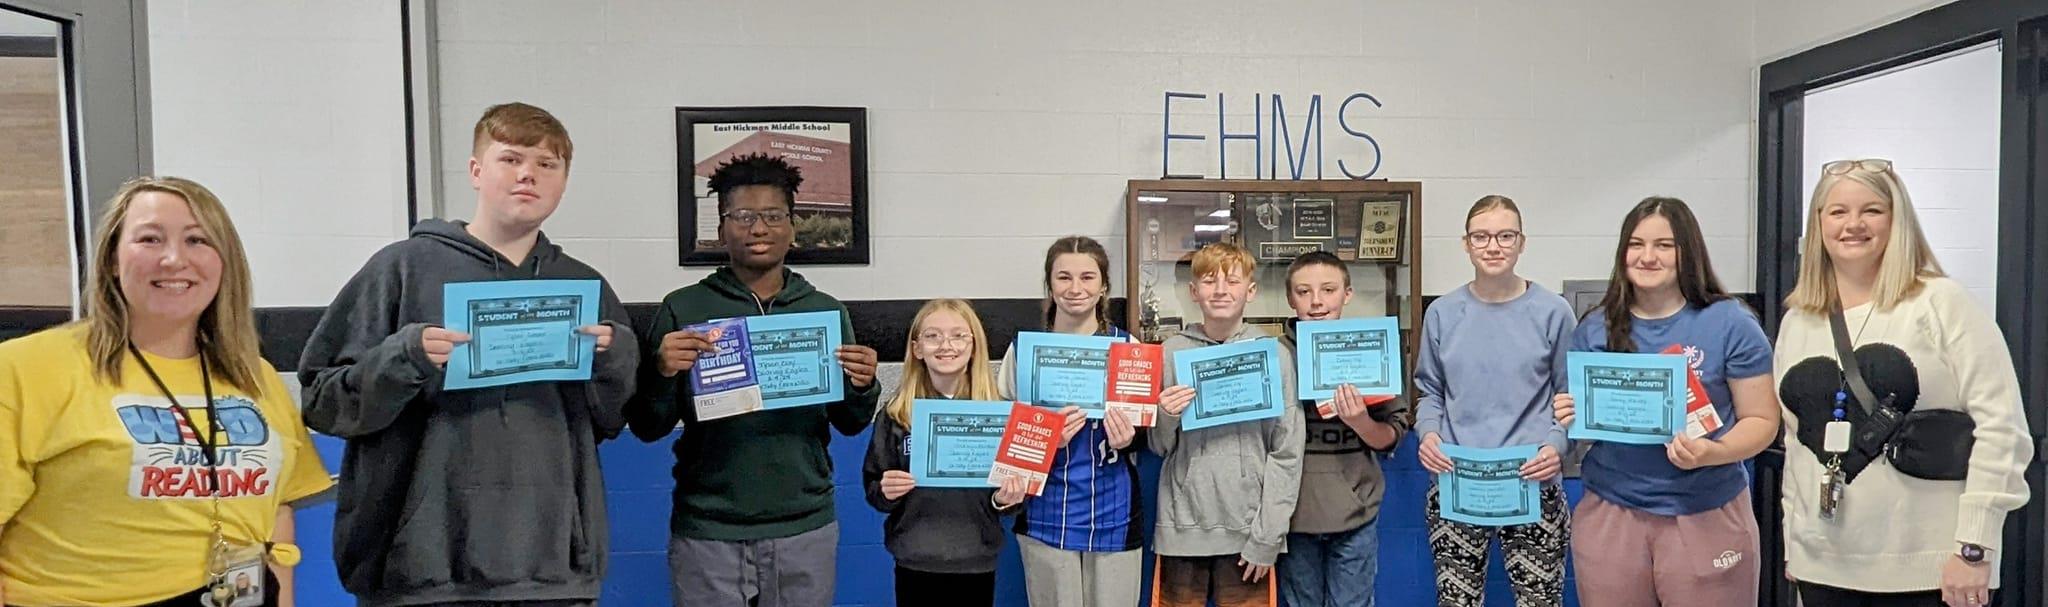 EHMS Students posing with certificates for reading